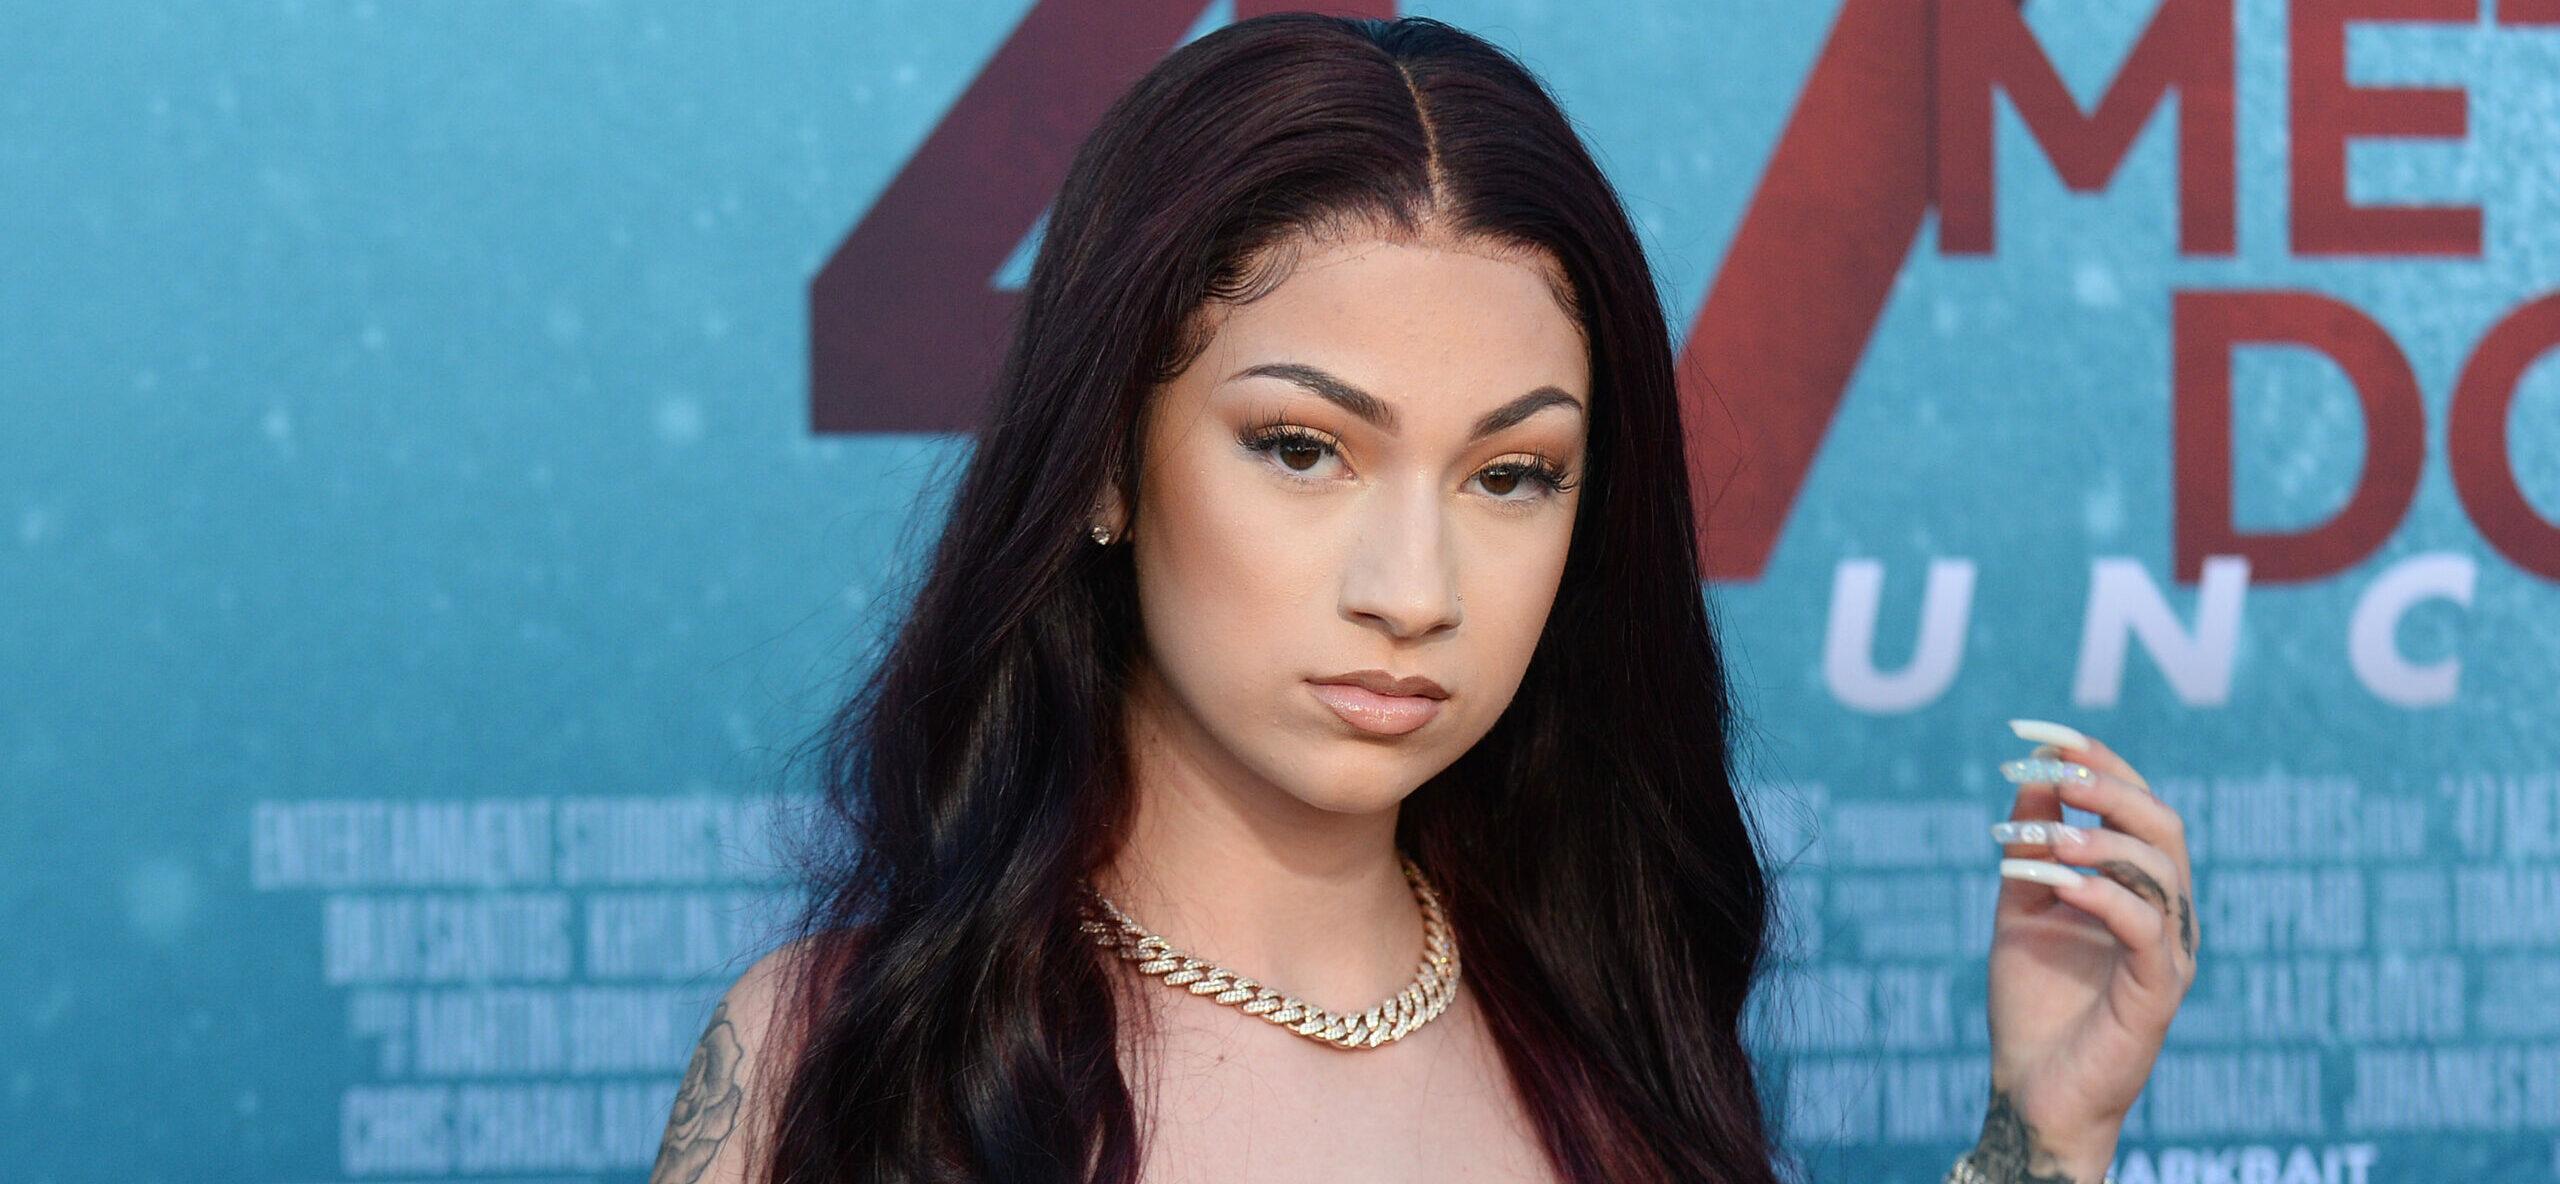 Bhad Bhabie Celebrates Her 20th Birthday In Style: Twerking For Her Mom In A Pink Bikini!